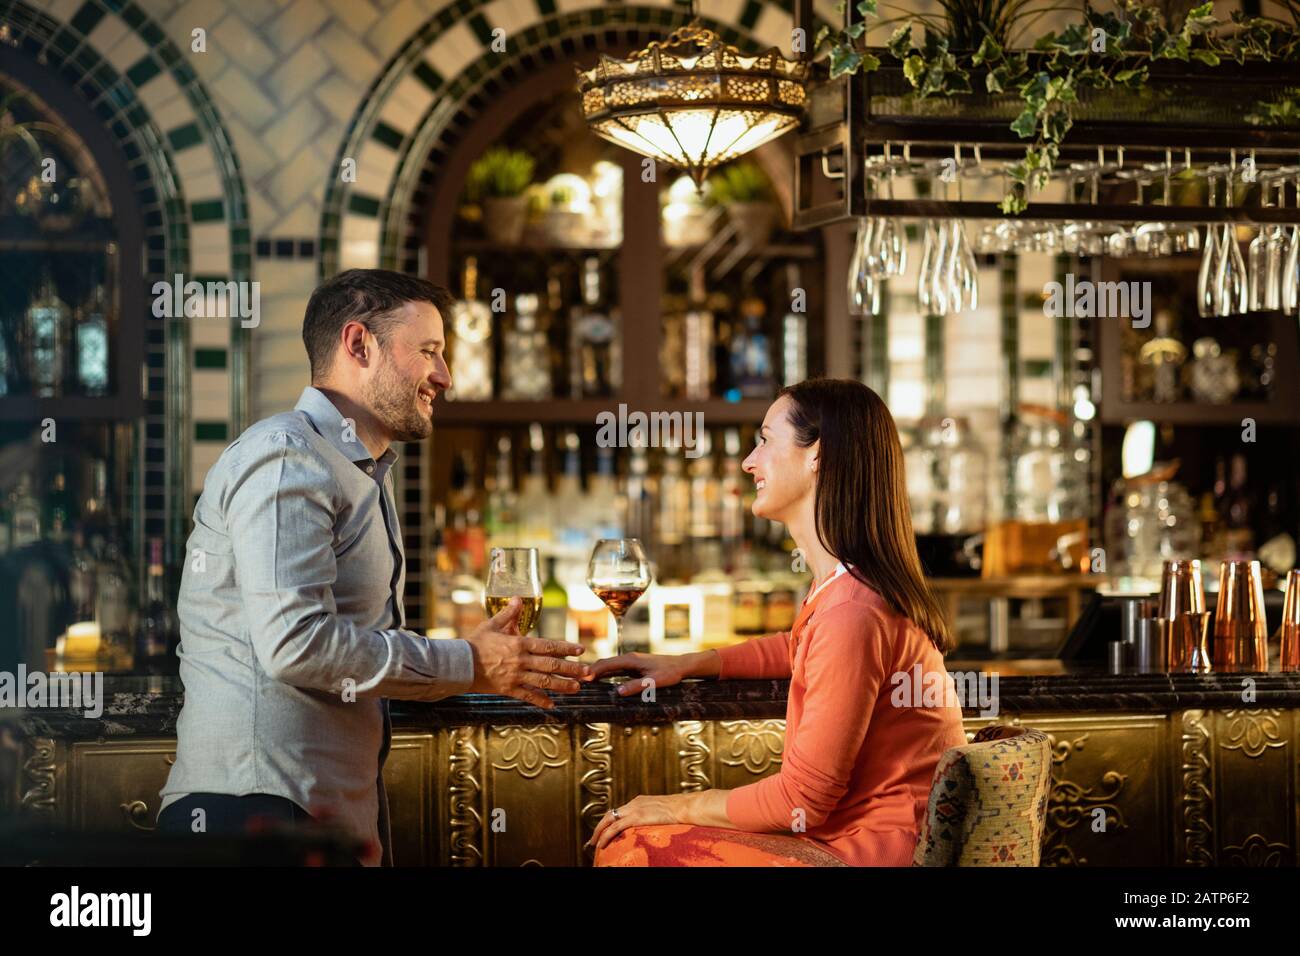 A couple having a drink together at a bar. Stock Photo